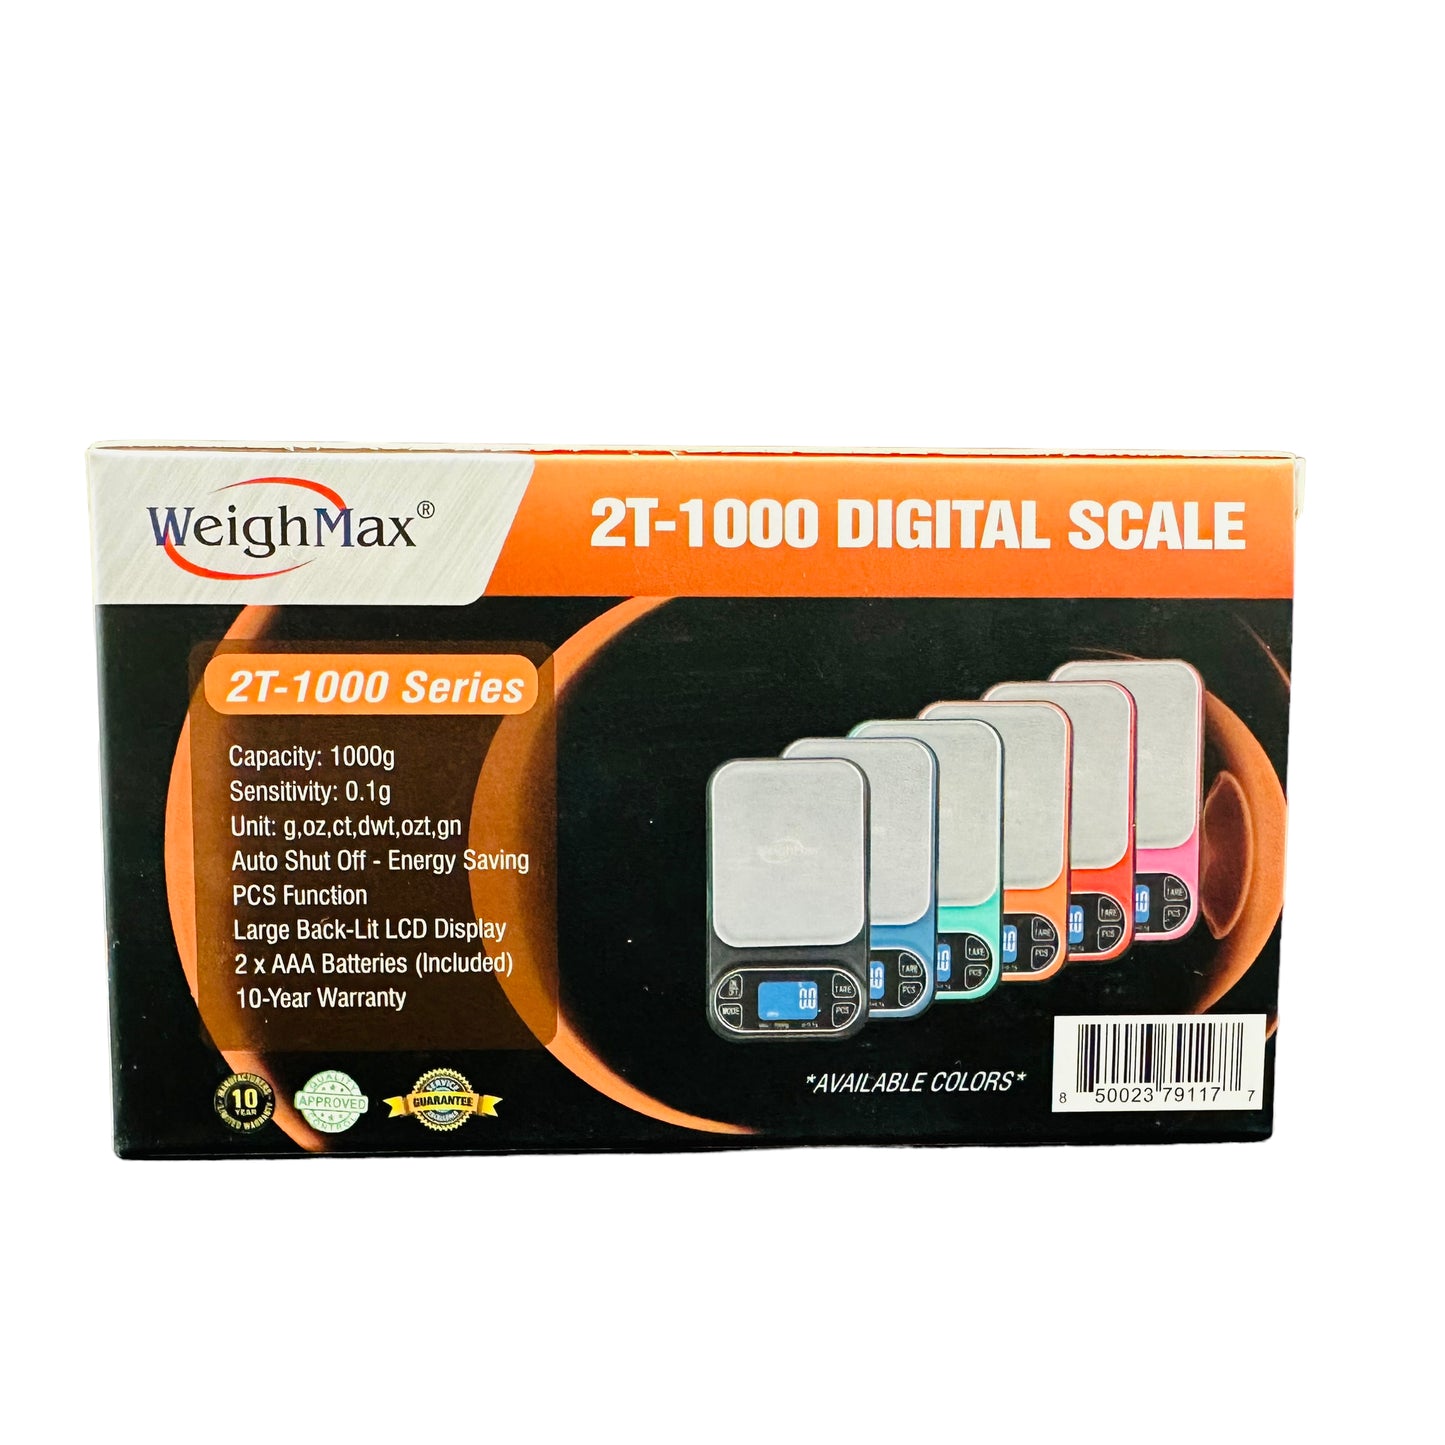 2T-1000 by Weighmax (Color Options Available) (B2B)